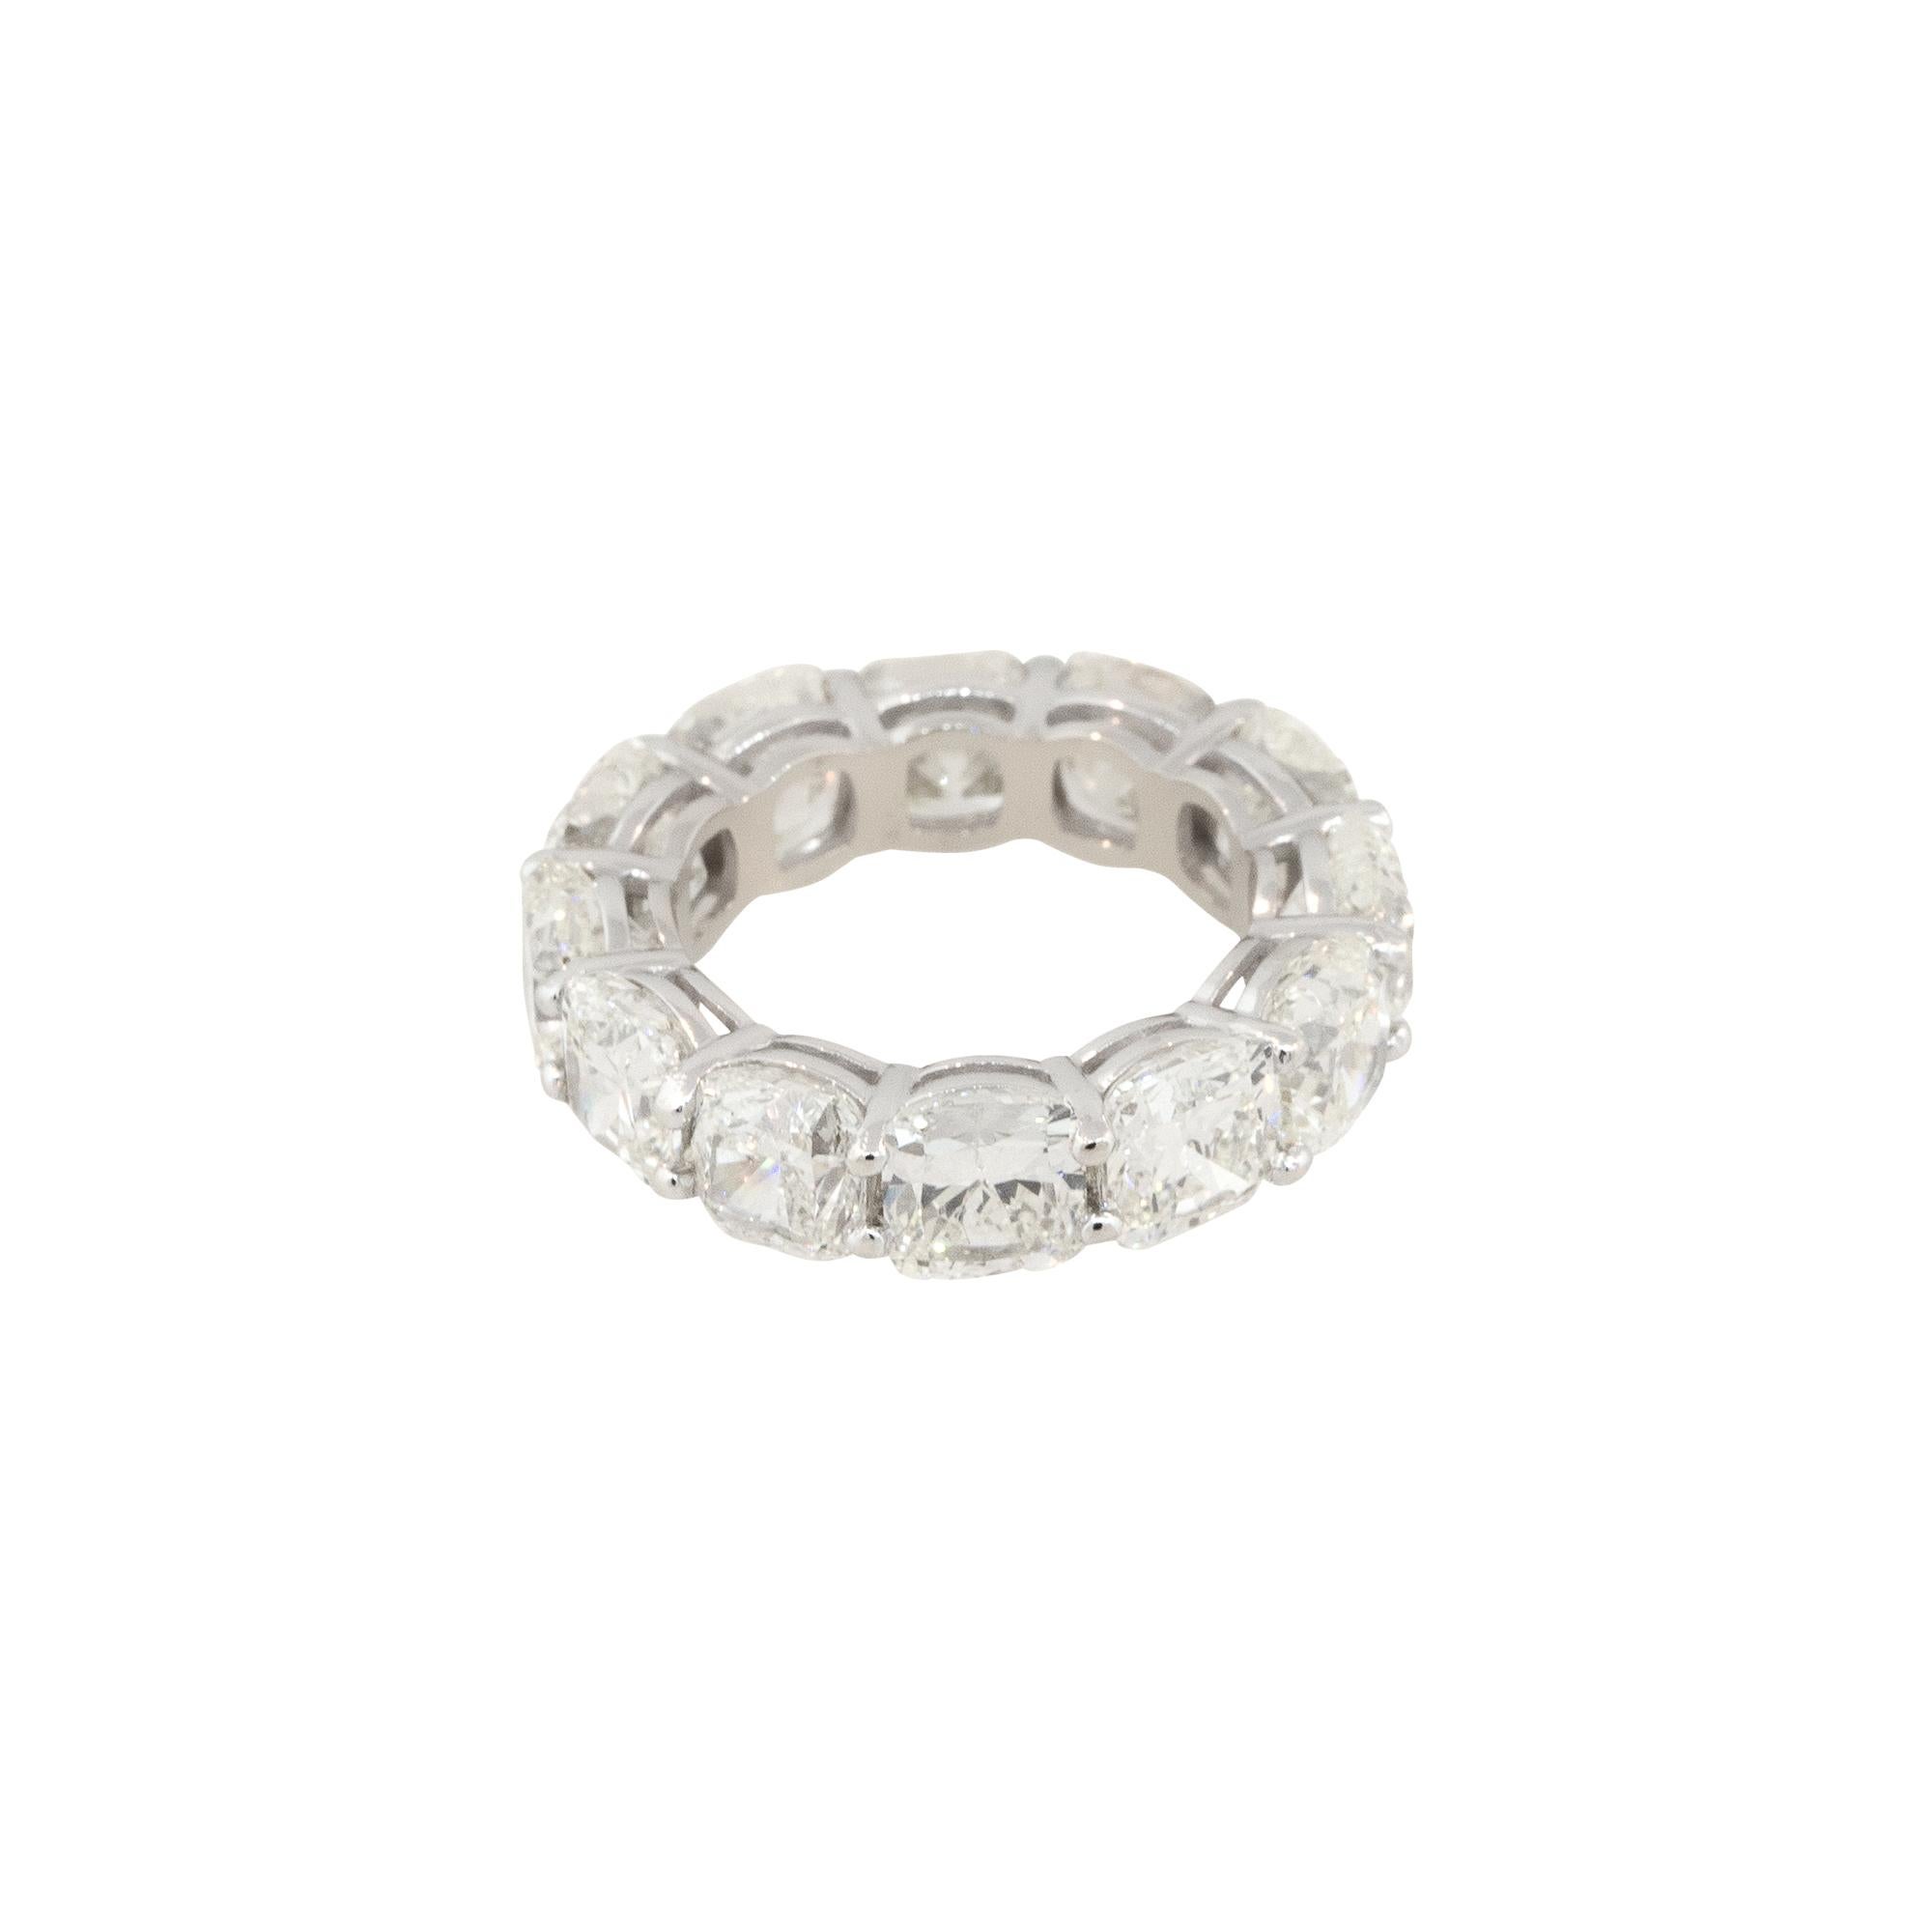 14k White Gold 12.55ctw Cushion Cut Diamond Eternity Band

Style: Women's Cushion Cut Diamond Eternity Band
Material: 14k White Gold
Diamond Details: Approximately 12.55ctw of Cushion Cut Diamonds are set with a shared prong setting and there are 12